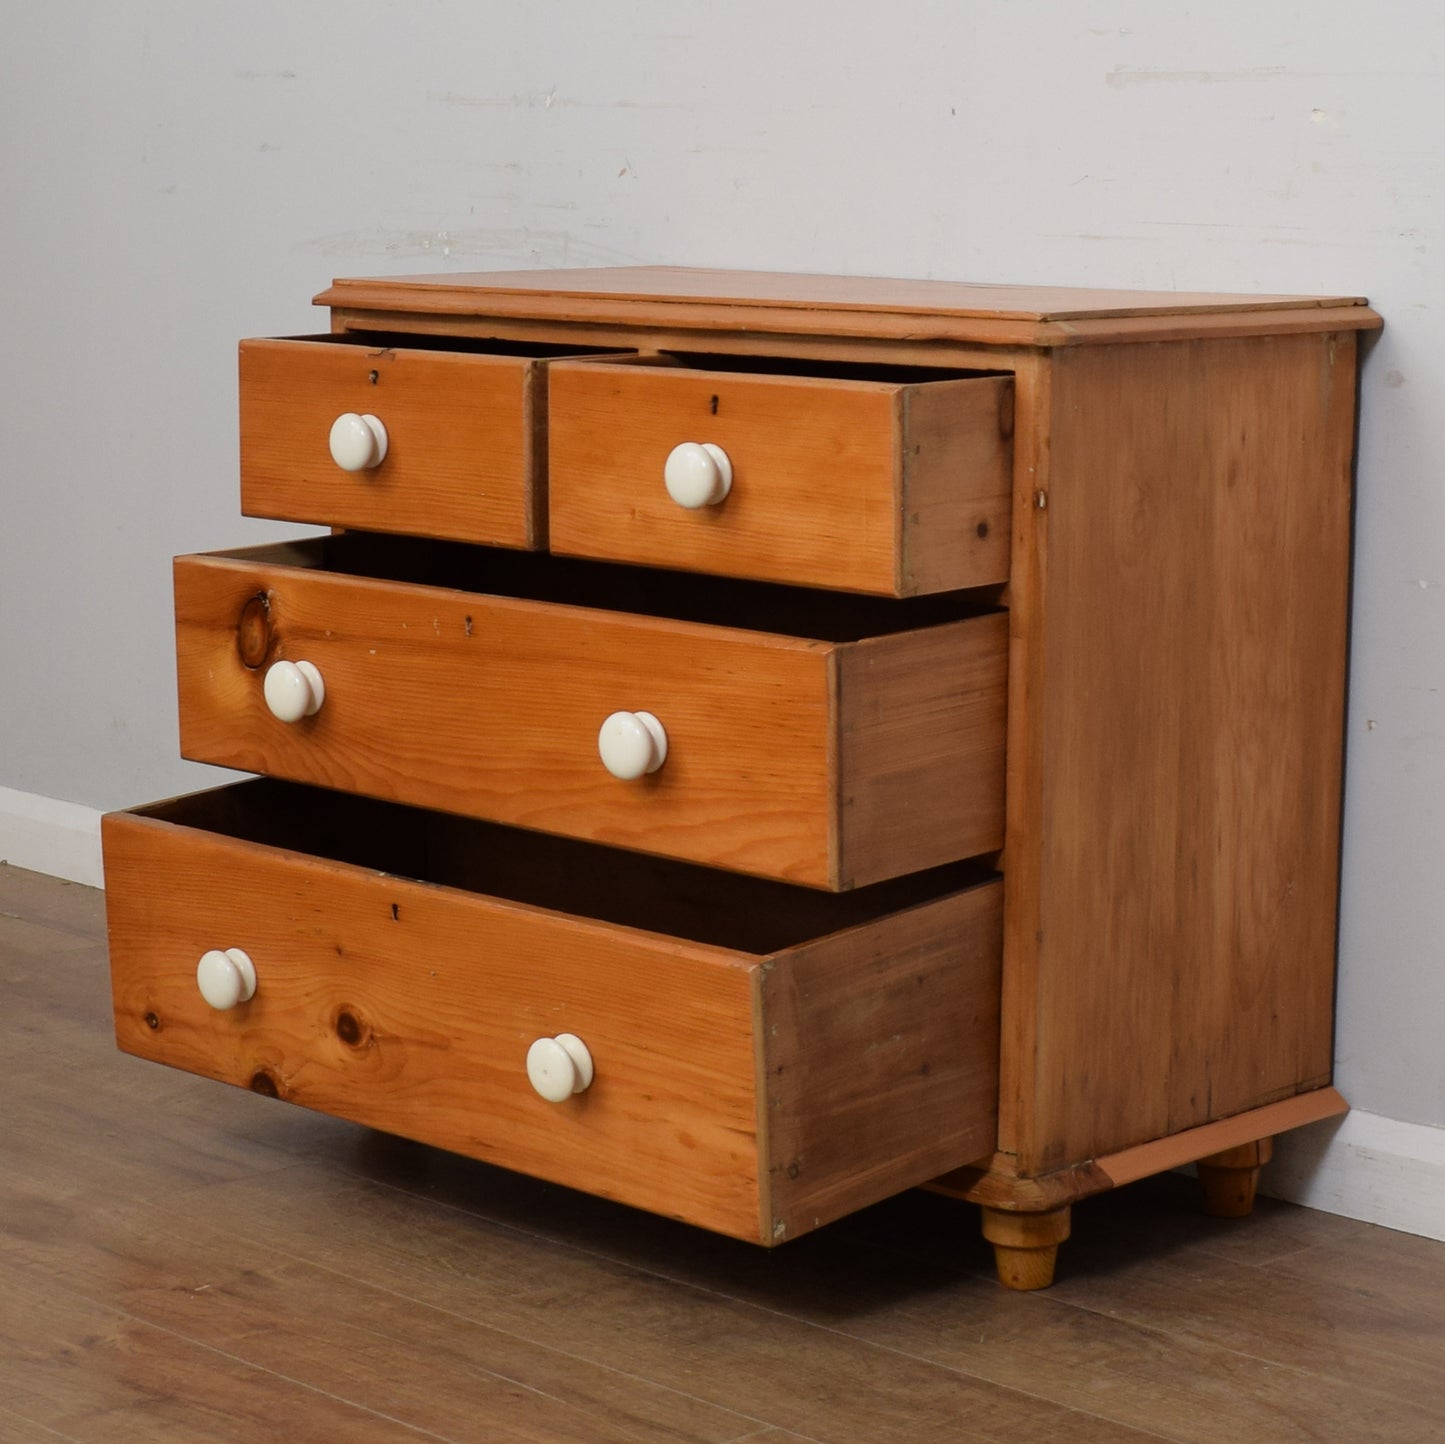 Antique Pine Chest Of Drawers